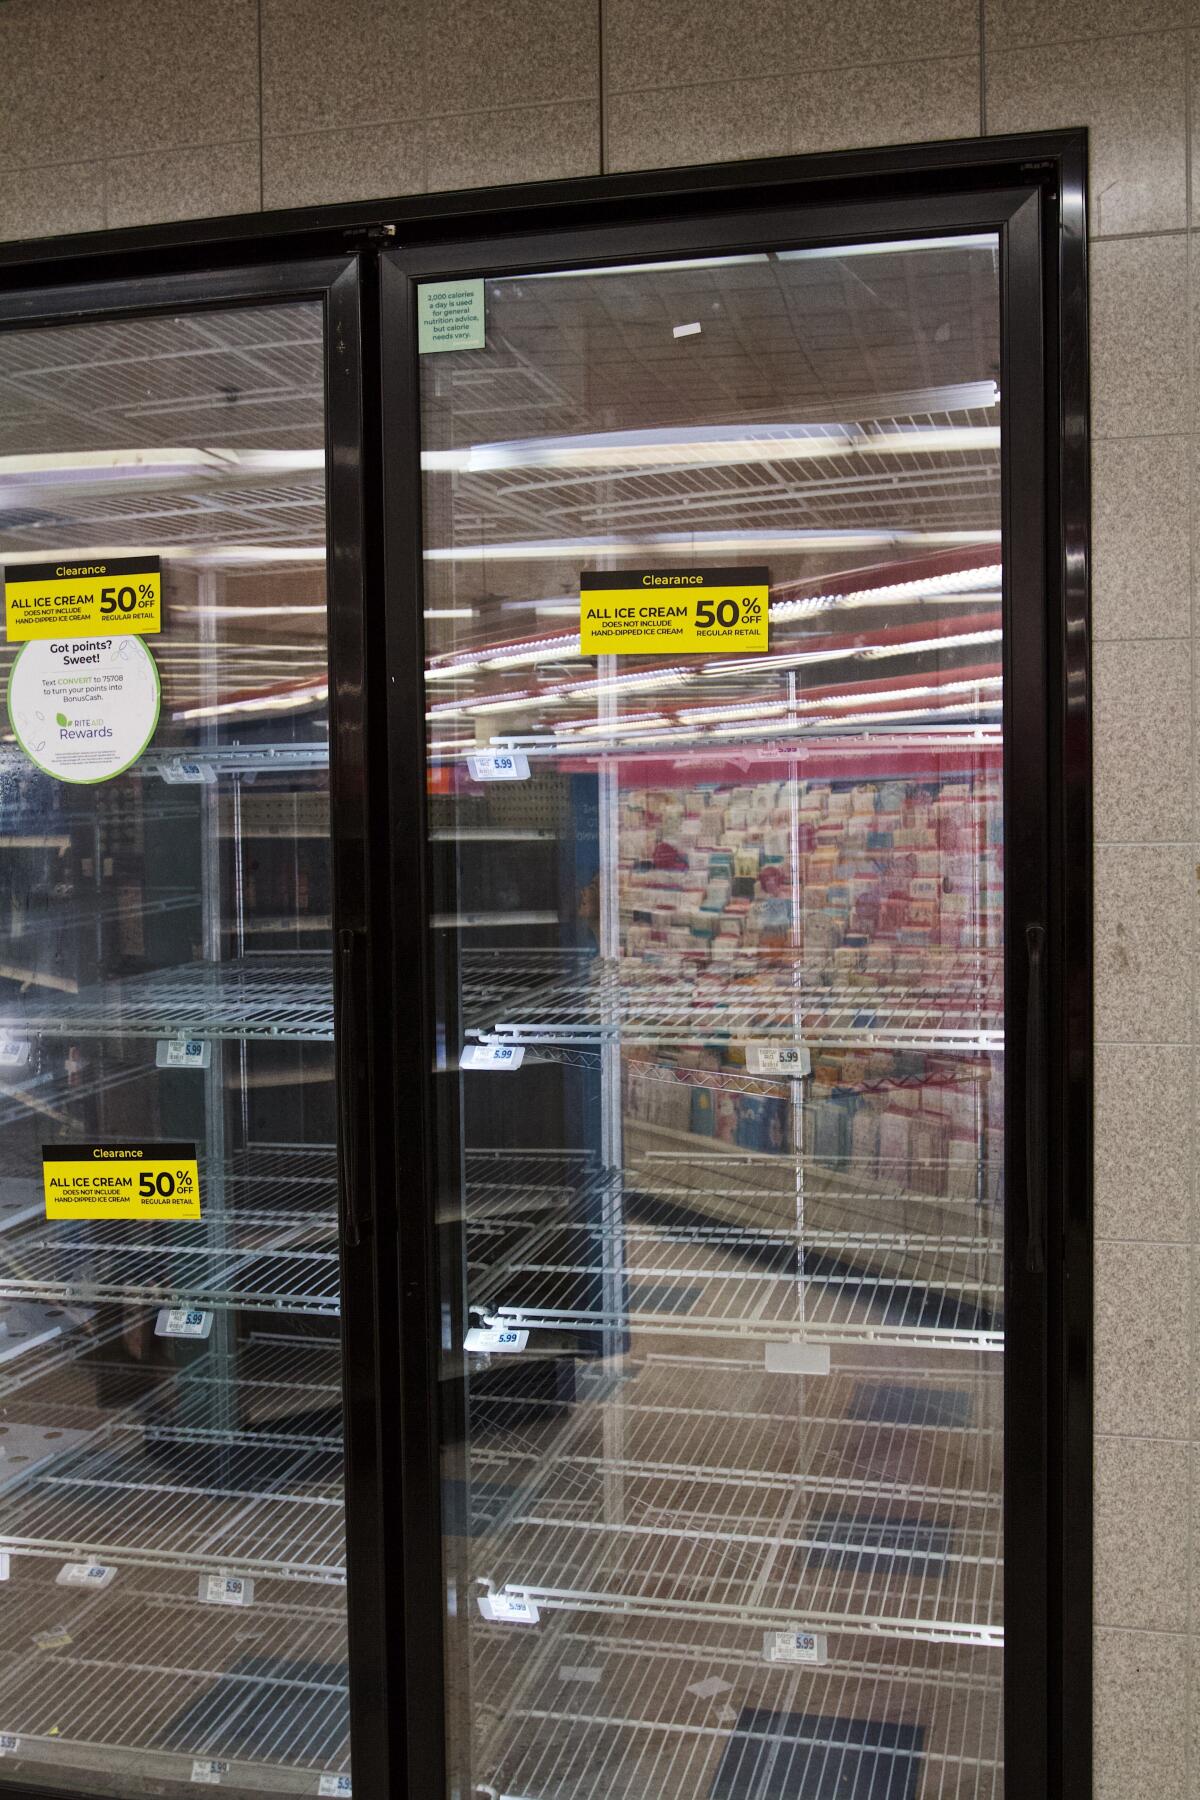 Empty shelves in the freezer aisle of Rite Aid's Alhambra location